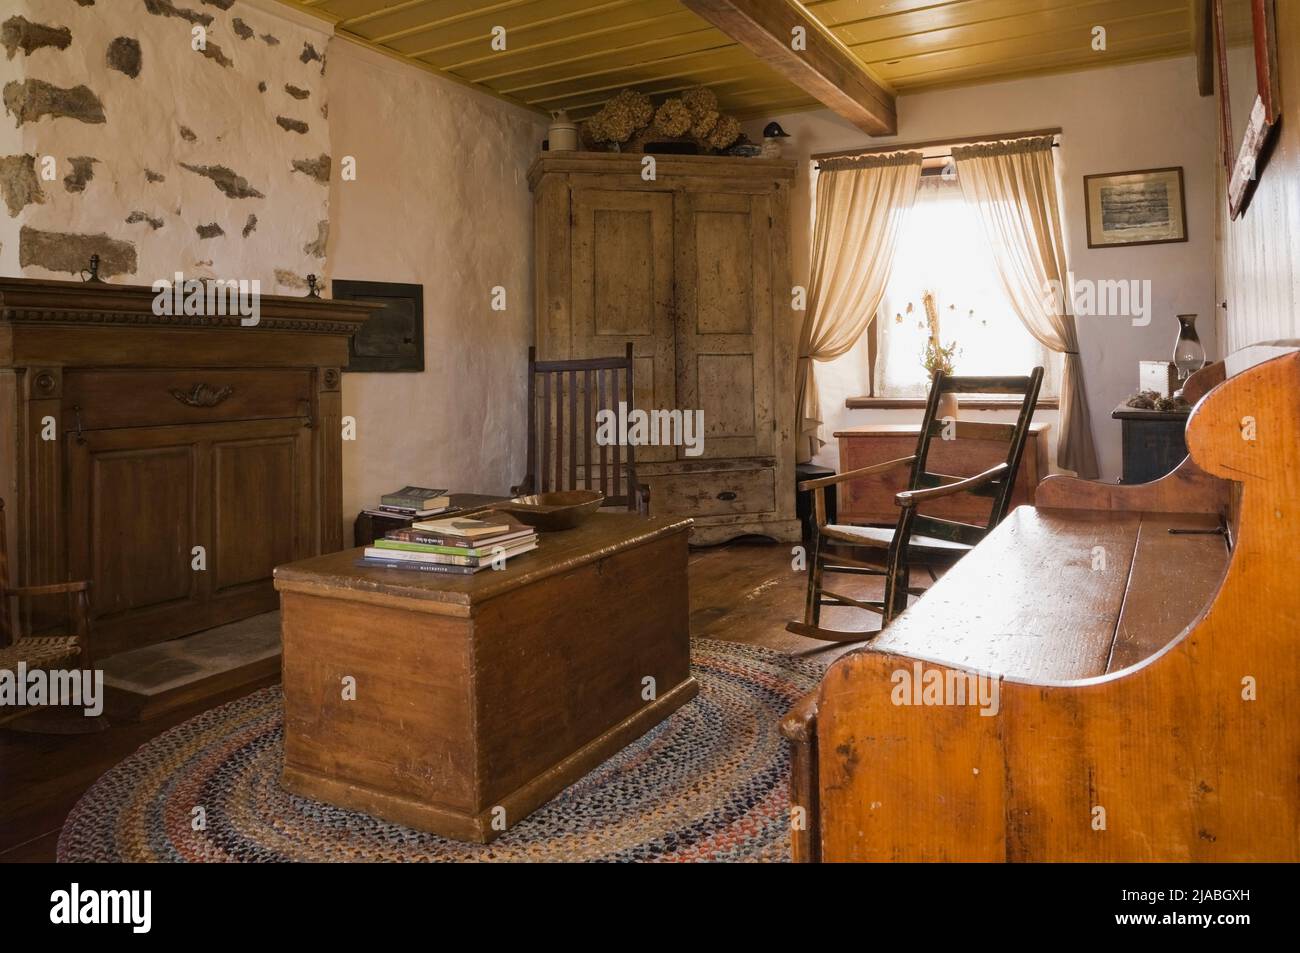 Antique chests, rocking chairs, armoire and furnishings in living room inside old circa 1840 Canadiana cottage style fieldstone home. Stock Photo